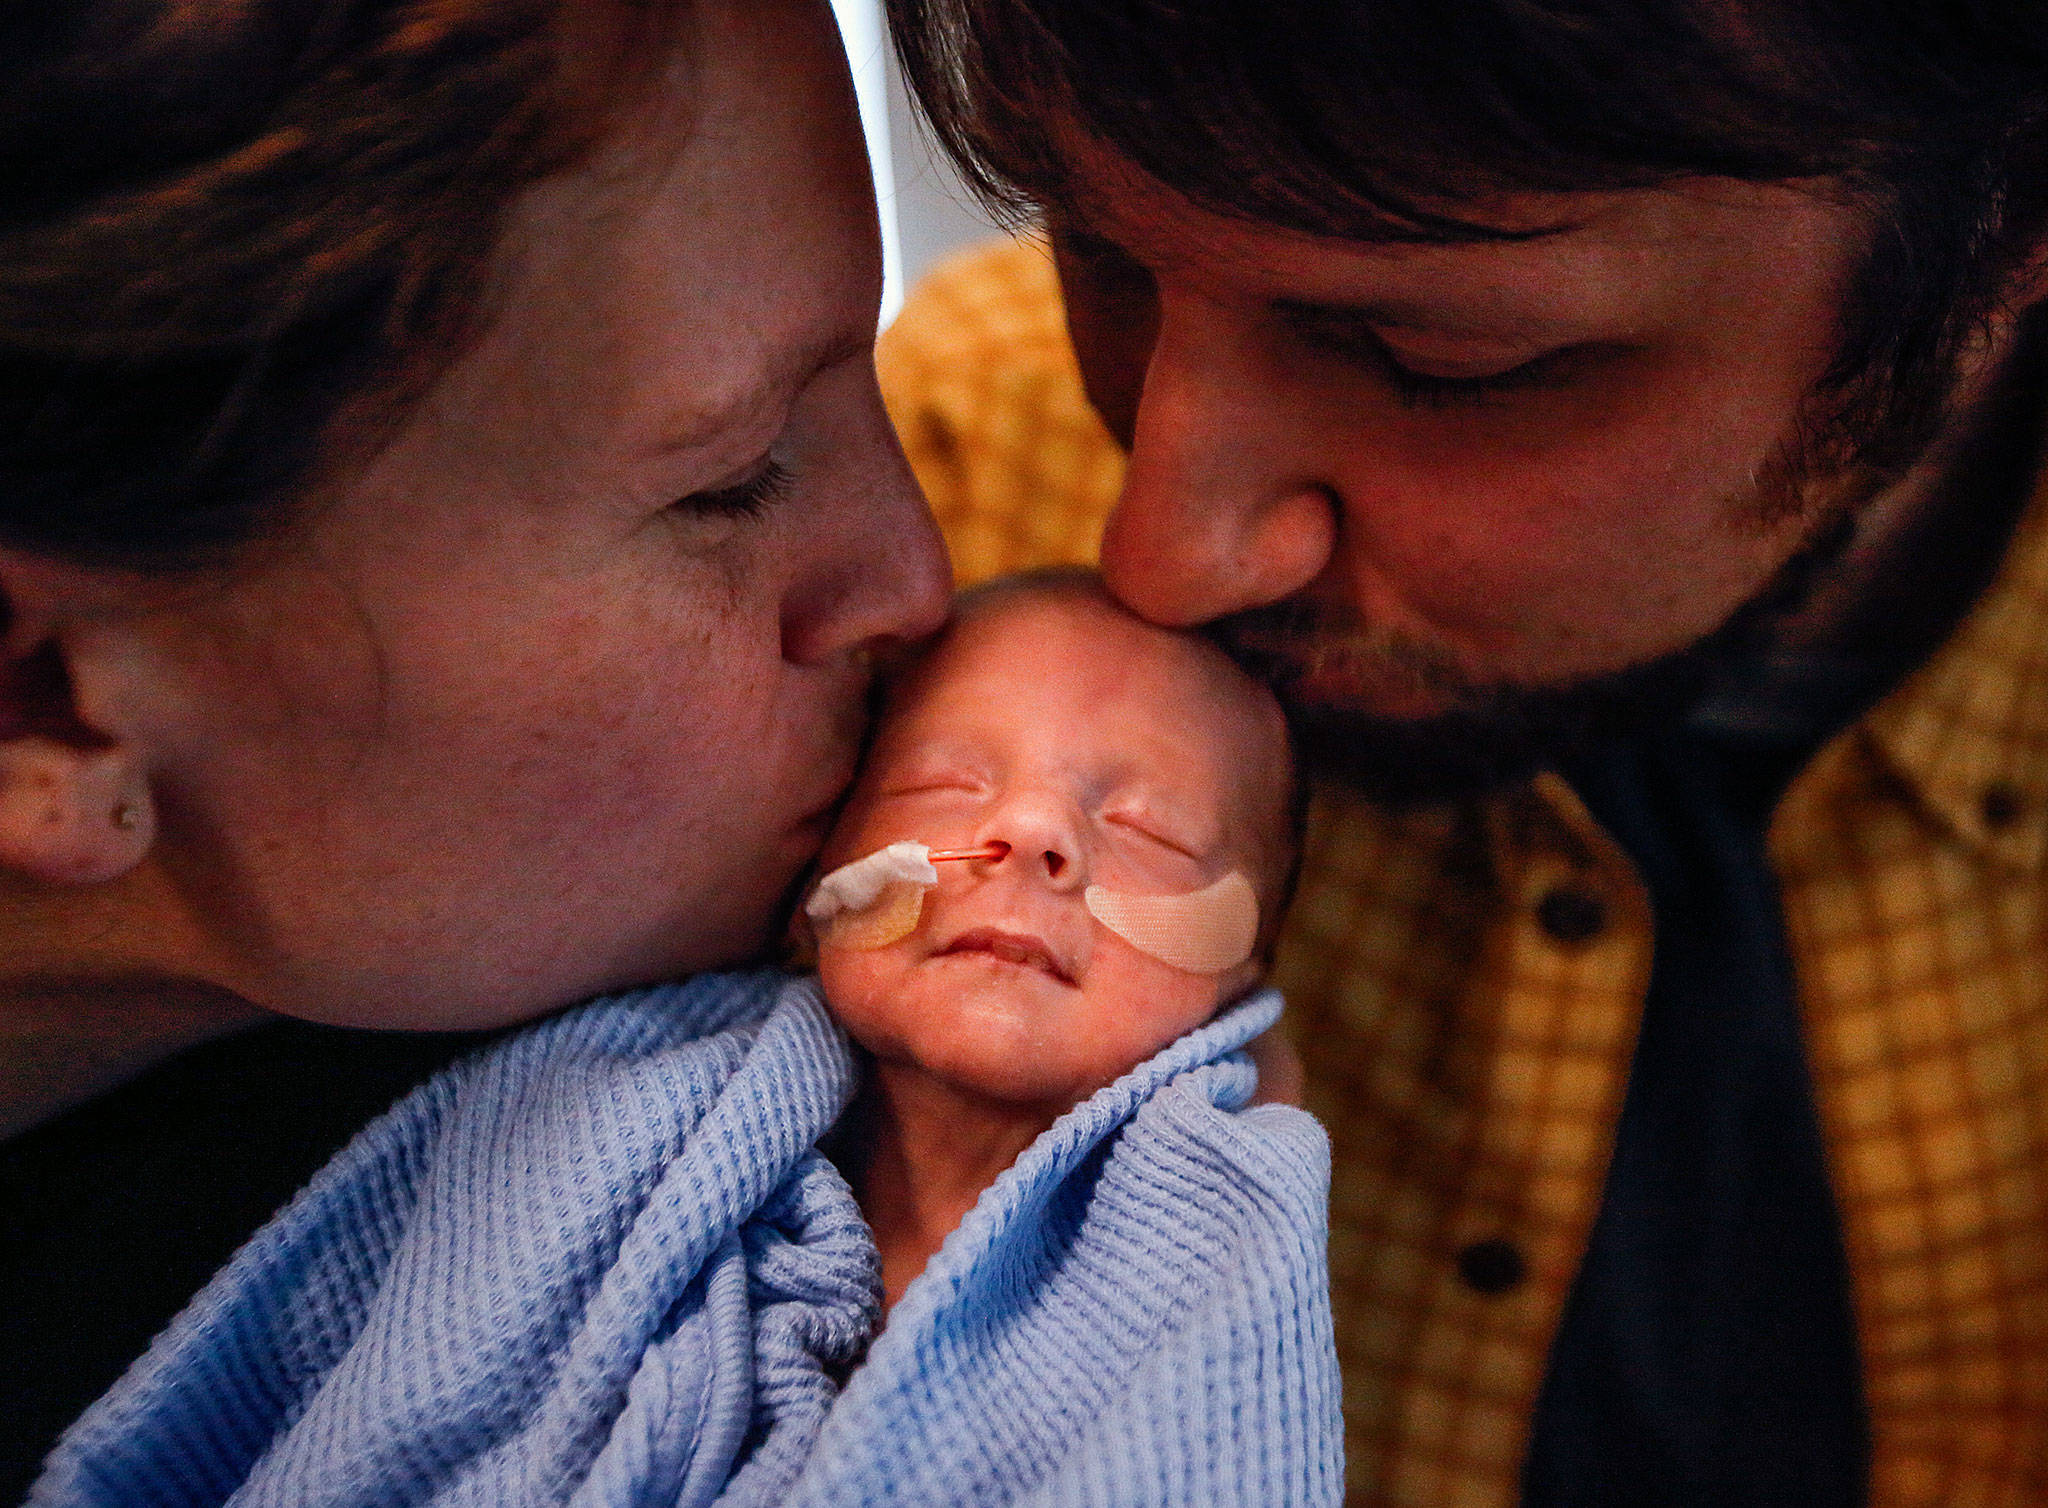 Elisabeth Strom and husband Steve Strom of Marysville kiss their son, Hugo, who was born on the way to the hospital Dec. 2, at 30 weeks. He weighed 3 pounds, 11.6 ounces. Hugo is in neonatal intensive care for several more weeks. (Dan Bates / The Herald)